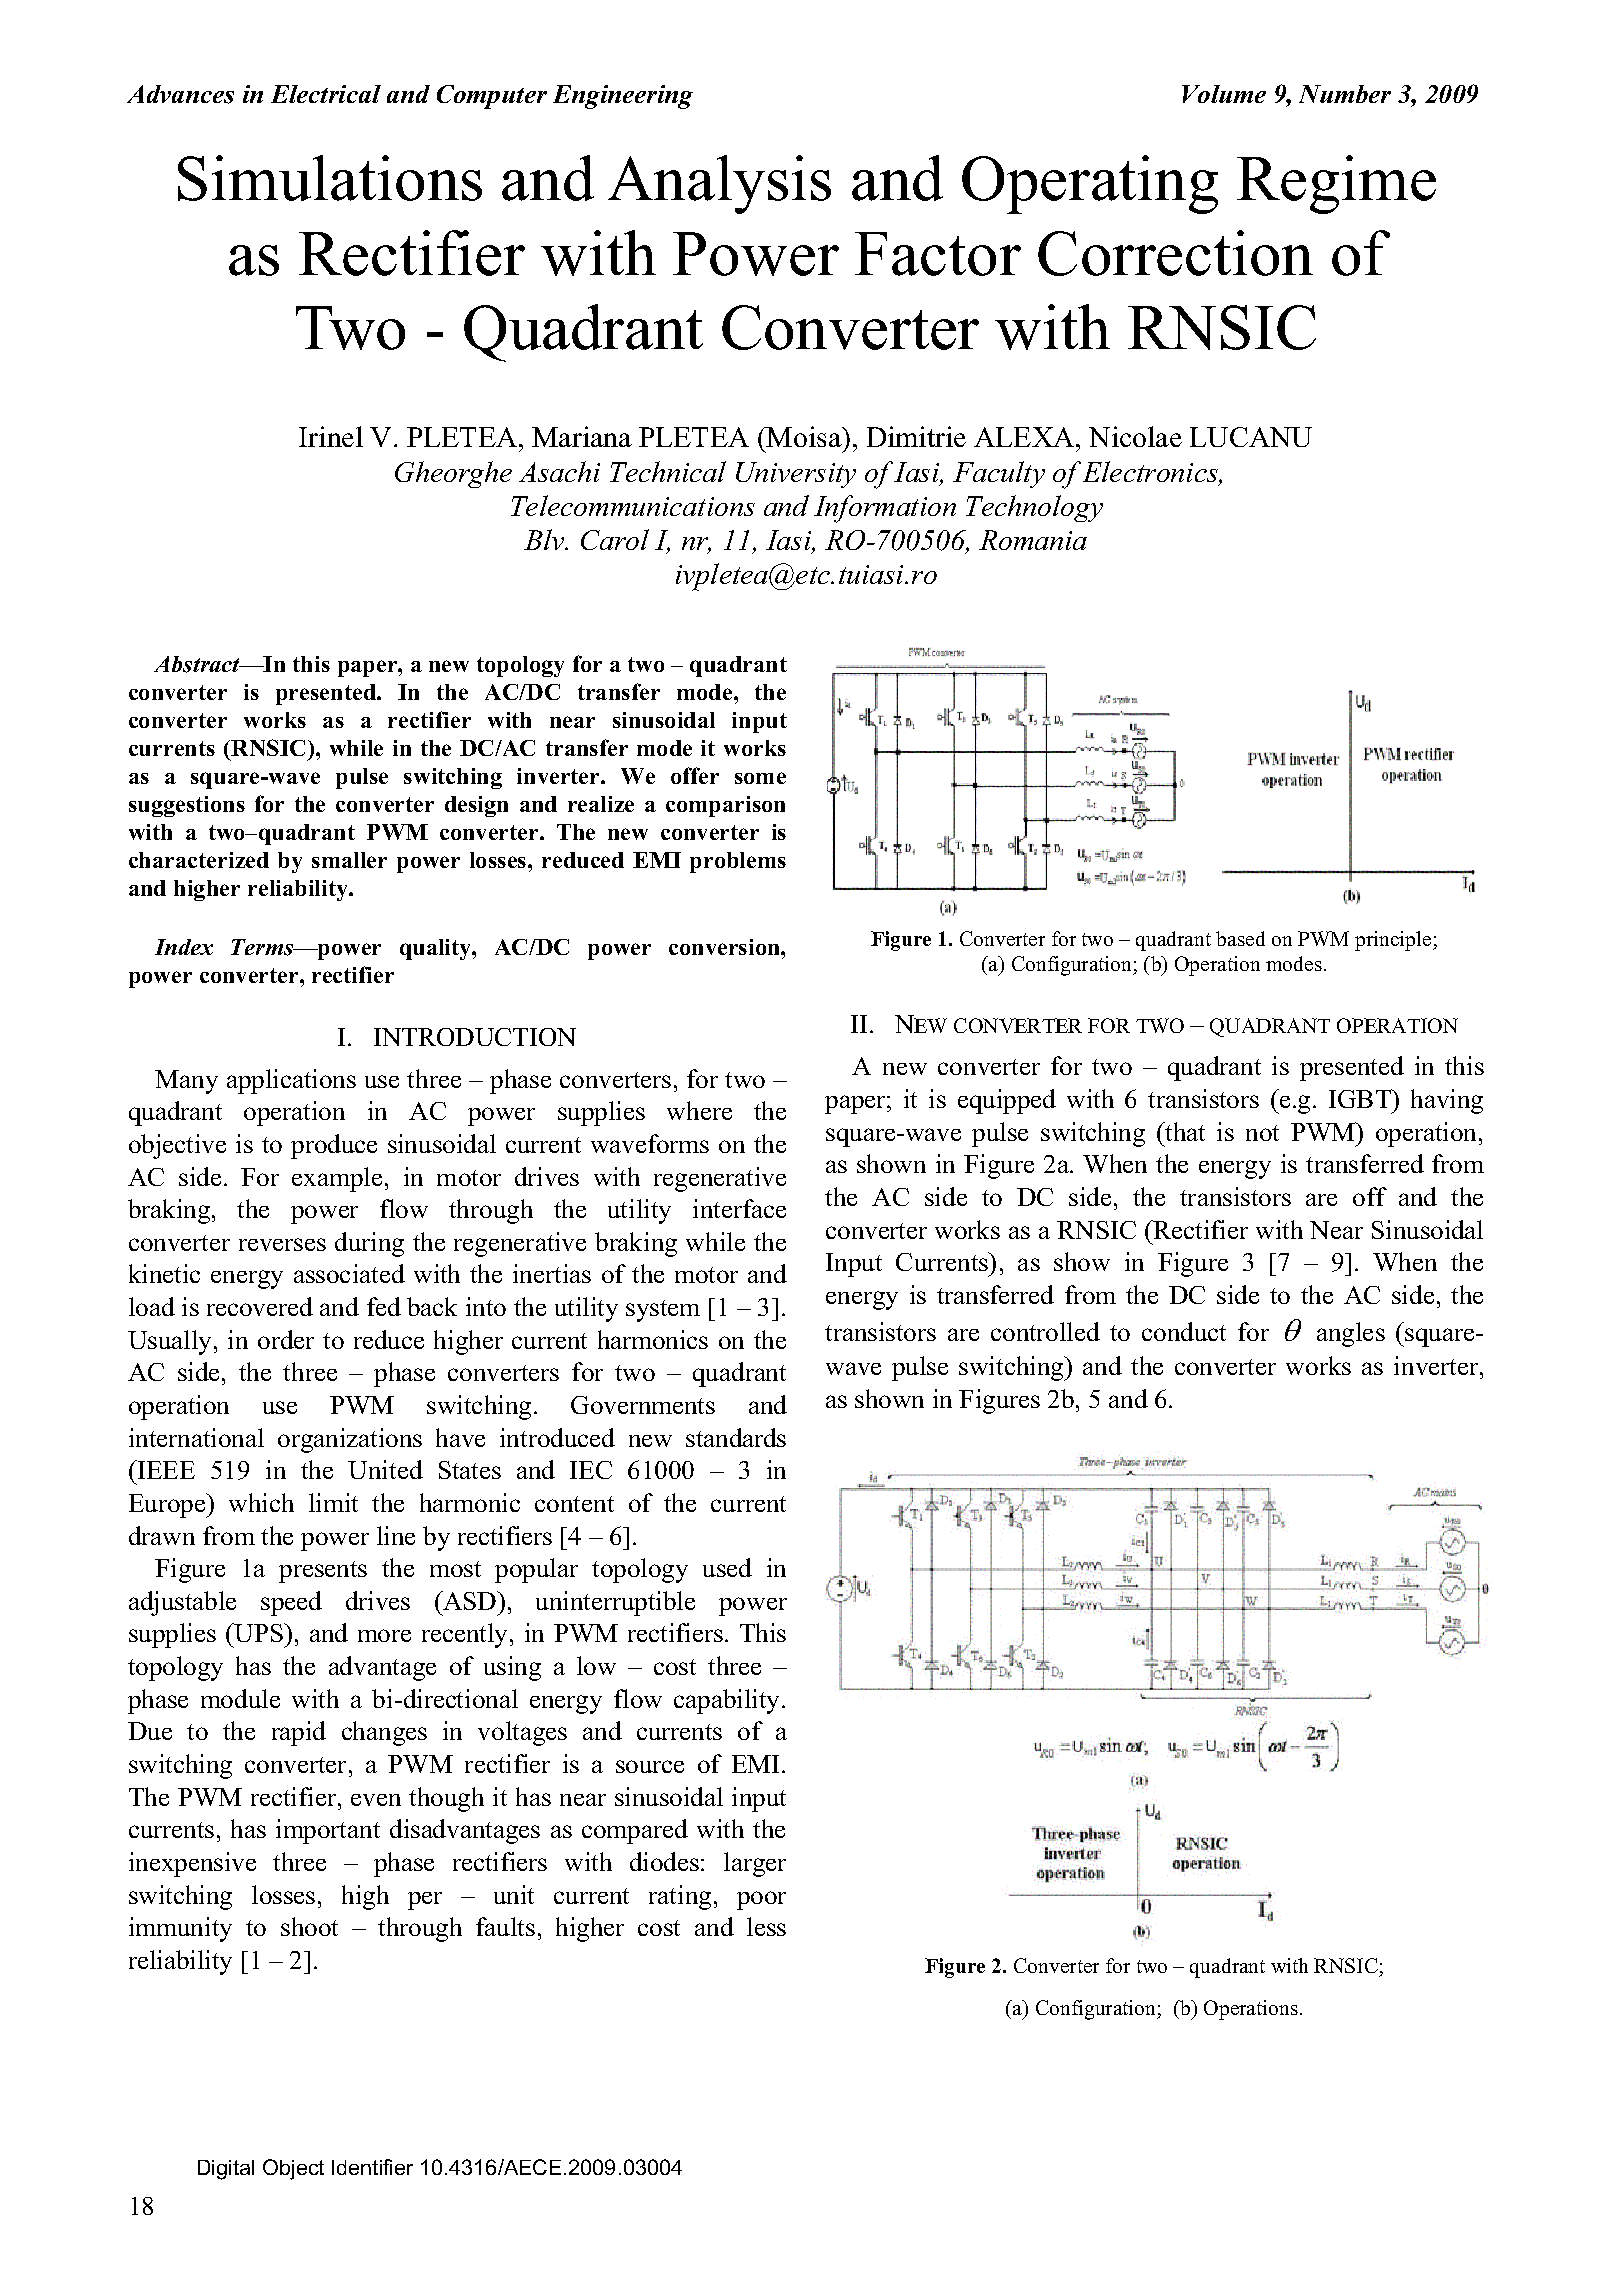 PDF Quickview for paper with DOI:10.4316/AECE.2009.03004